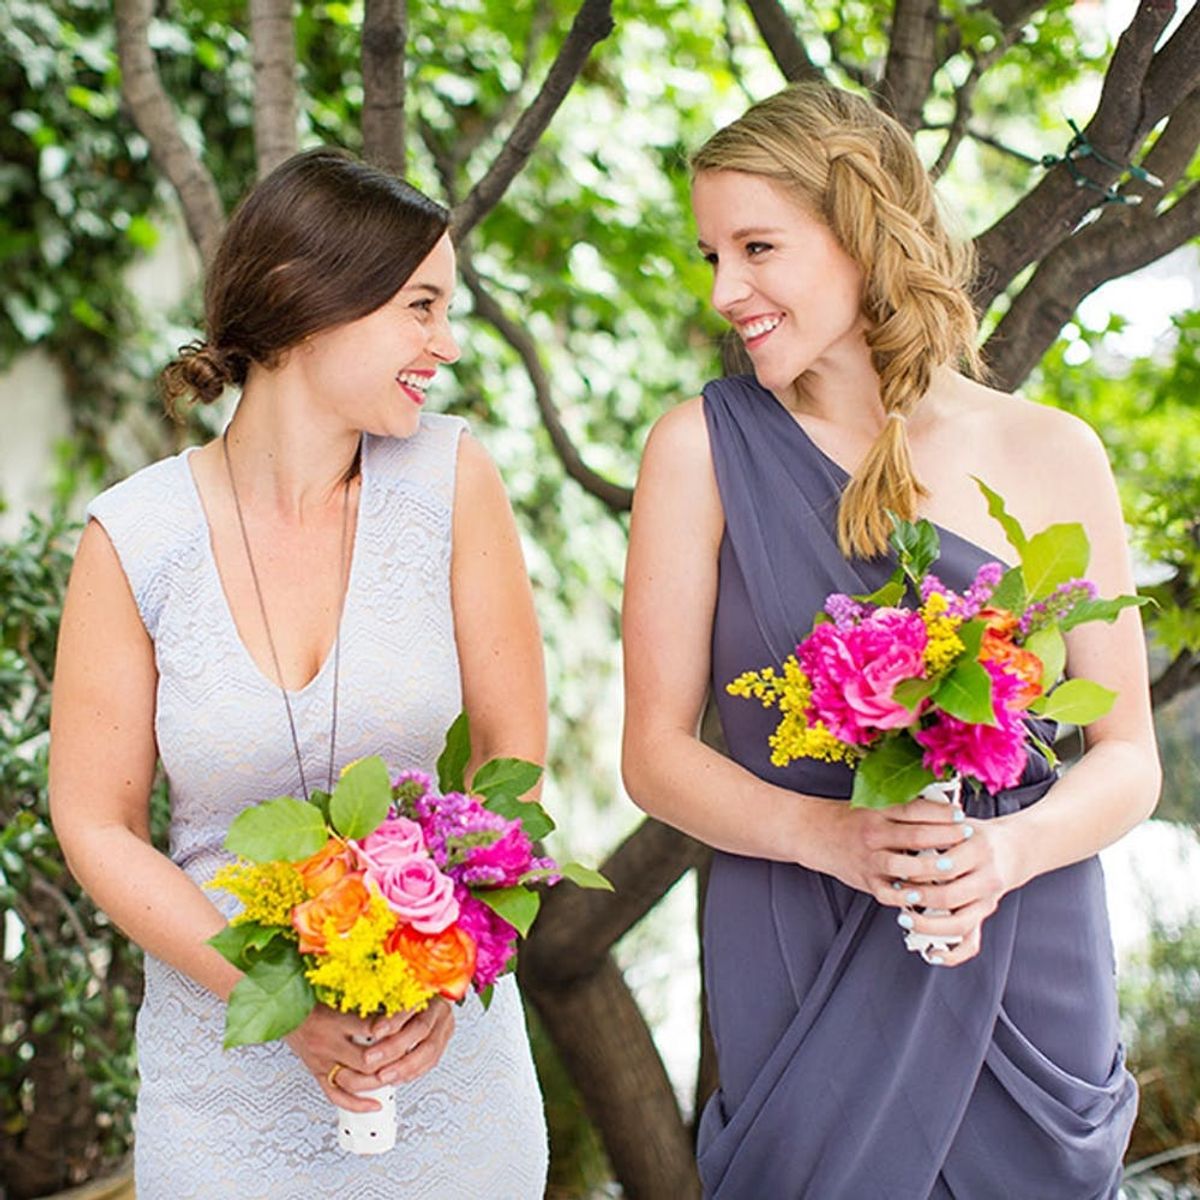 Here’s How Easy It Is to Become an Officiant for Your BFF’s Wedding